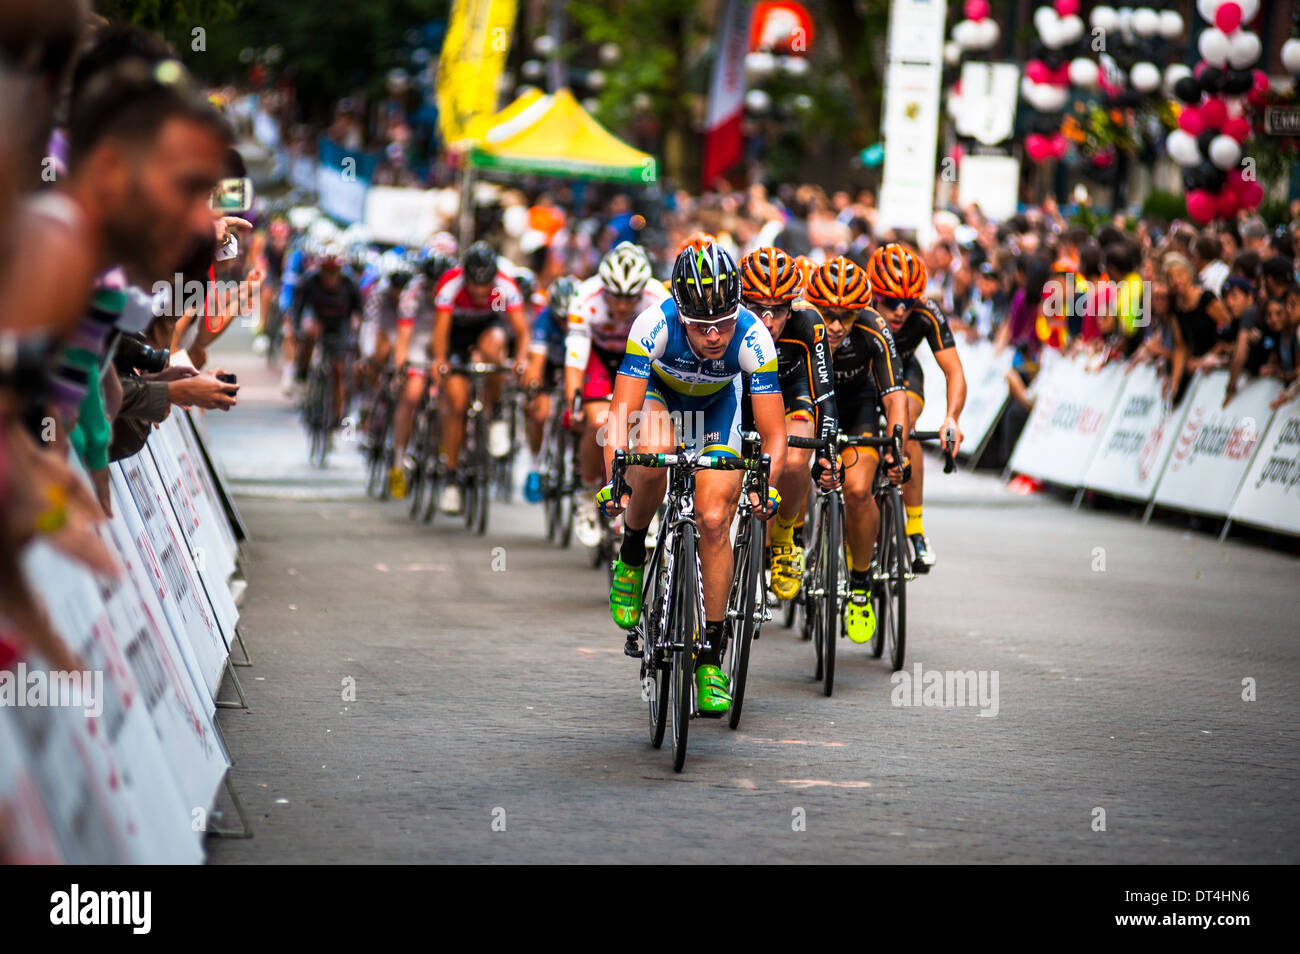 Vancouver, British Columbia, - July 10: Men and women compete in the 2013 Gastown Grand Prix cycling race, July 10, 2013. Stock Photo